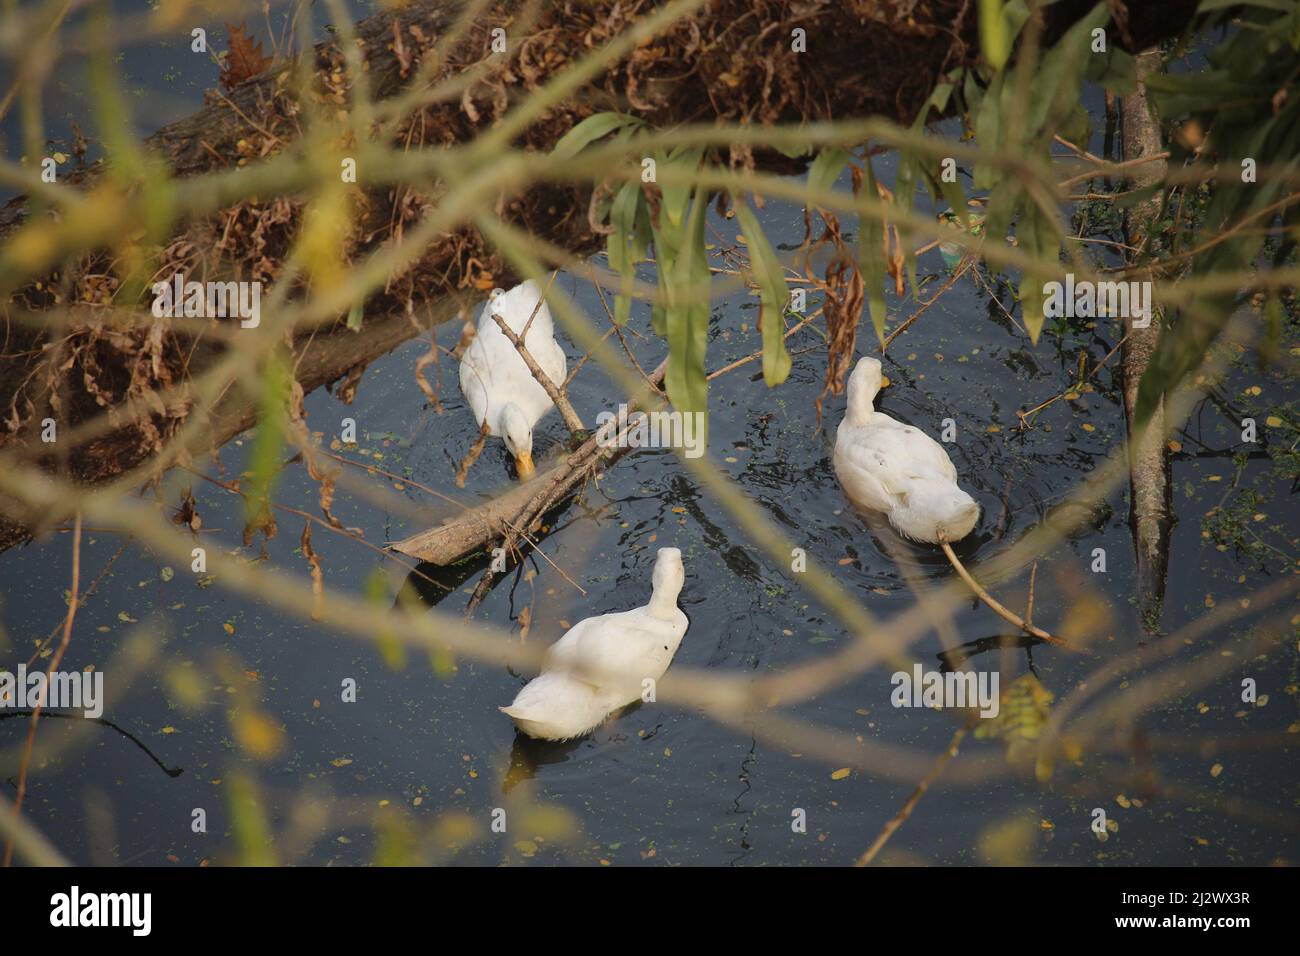 Some white ducks are swimming in the black water. Stock Photo